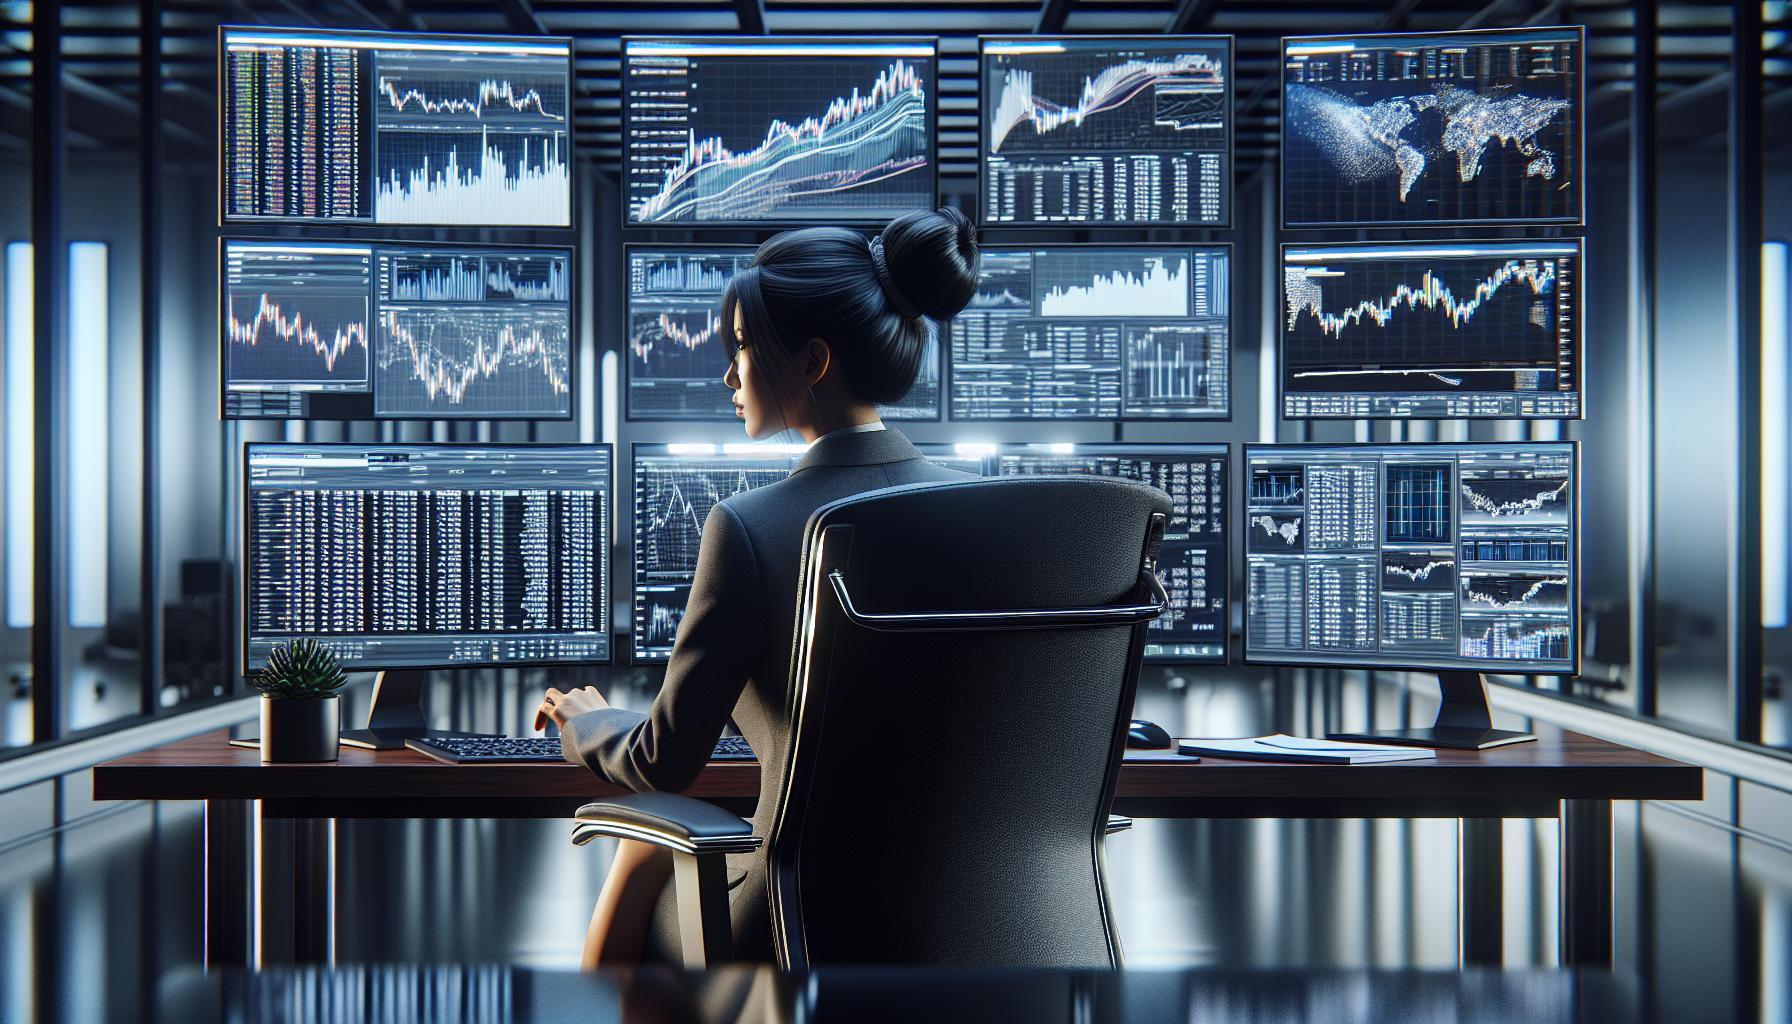 A woman is sitting at a desk in front of several monitors.